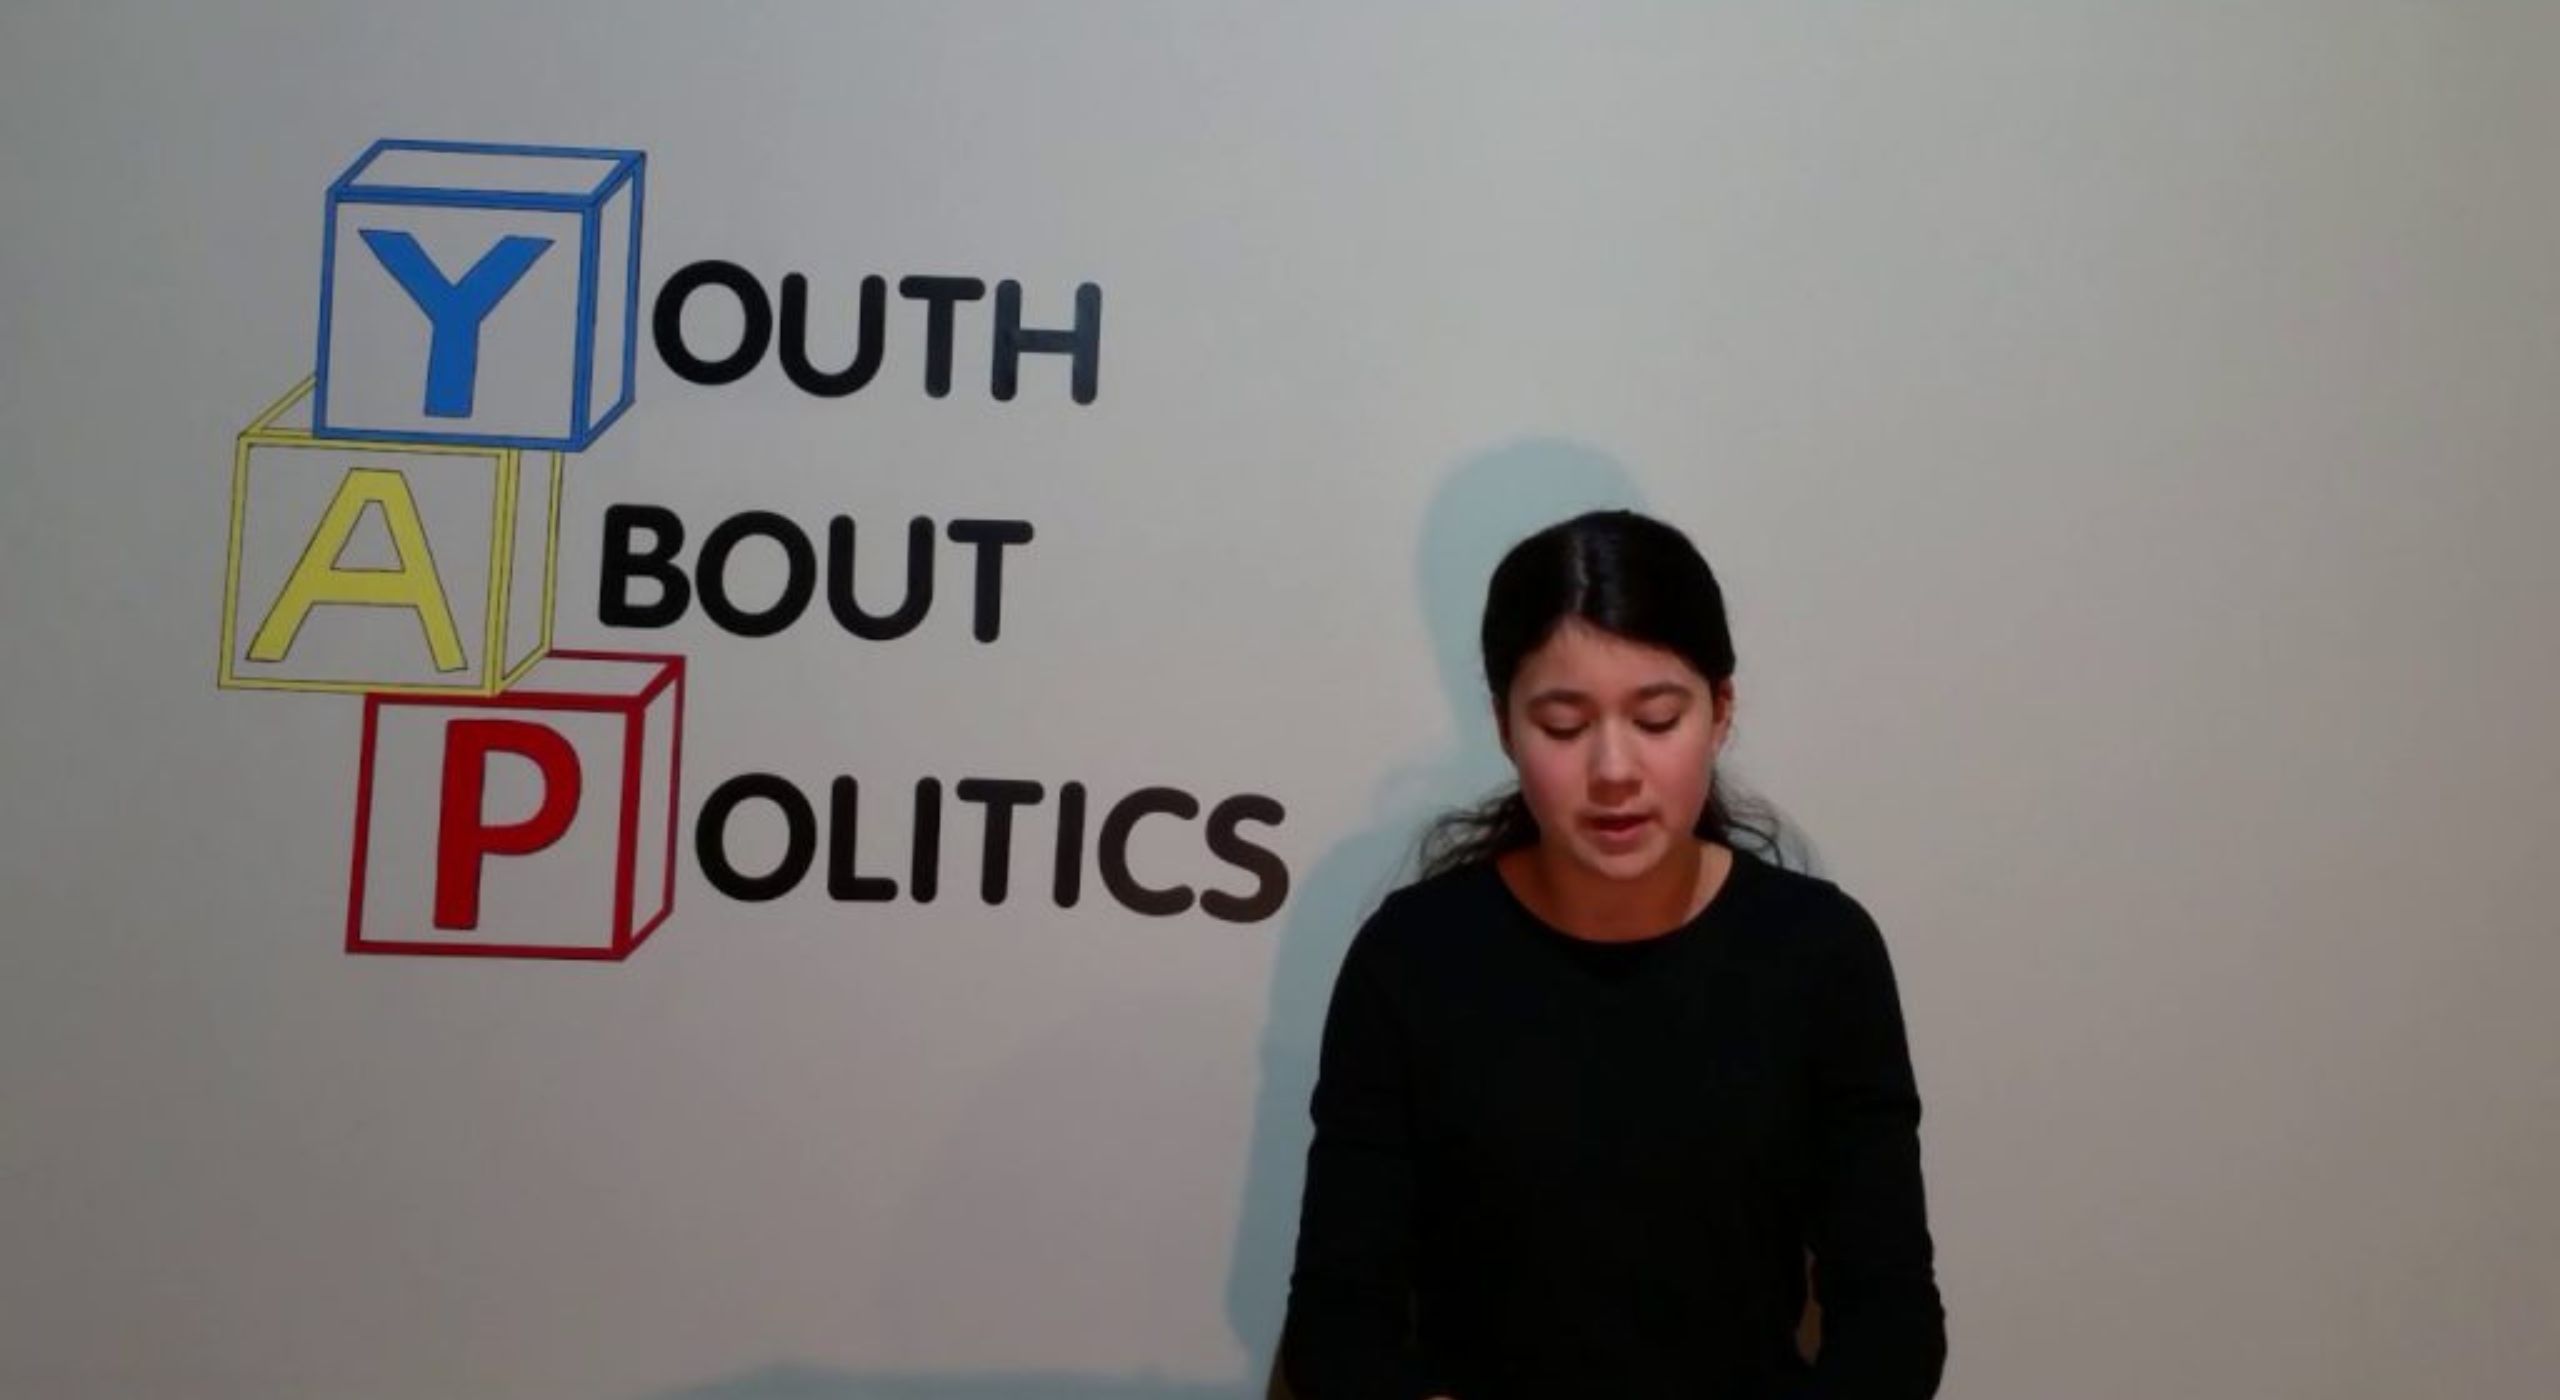 YOUTH AND POLITICS